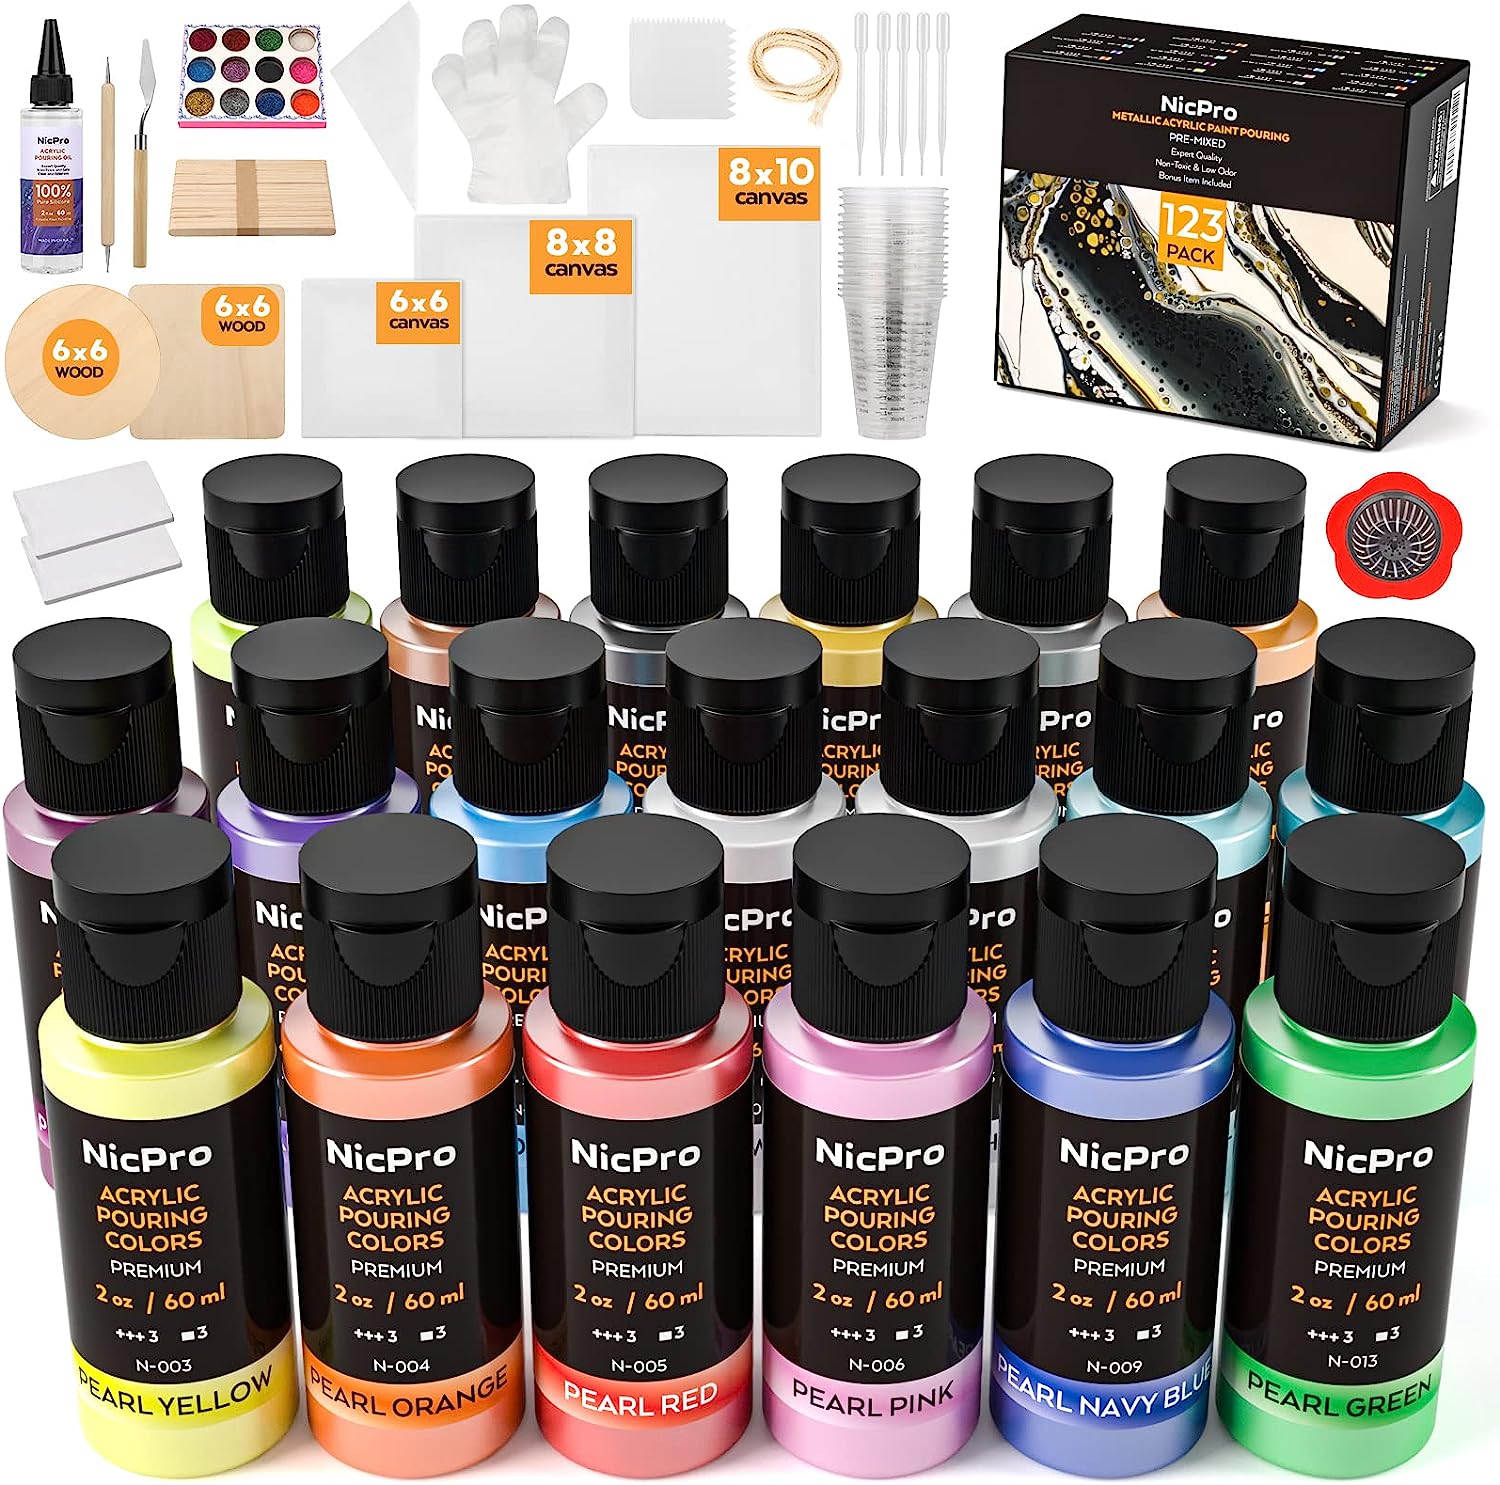 Acrylic Pouring Paint of 36 Bottles (2 oz/60ml) ,32 Assorted Colors Set to  Pre-Mixed High Flow Acrylic Paint Pouring Supplies for Canvas Glass Paper  Wood Tile and Stones, Complete Paint Pouring Kit